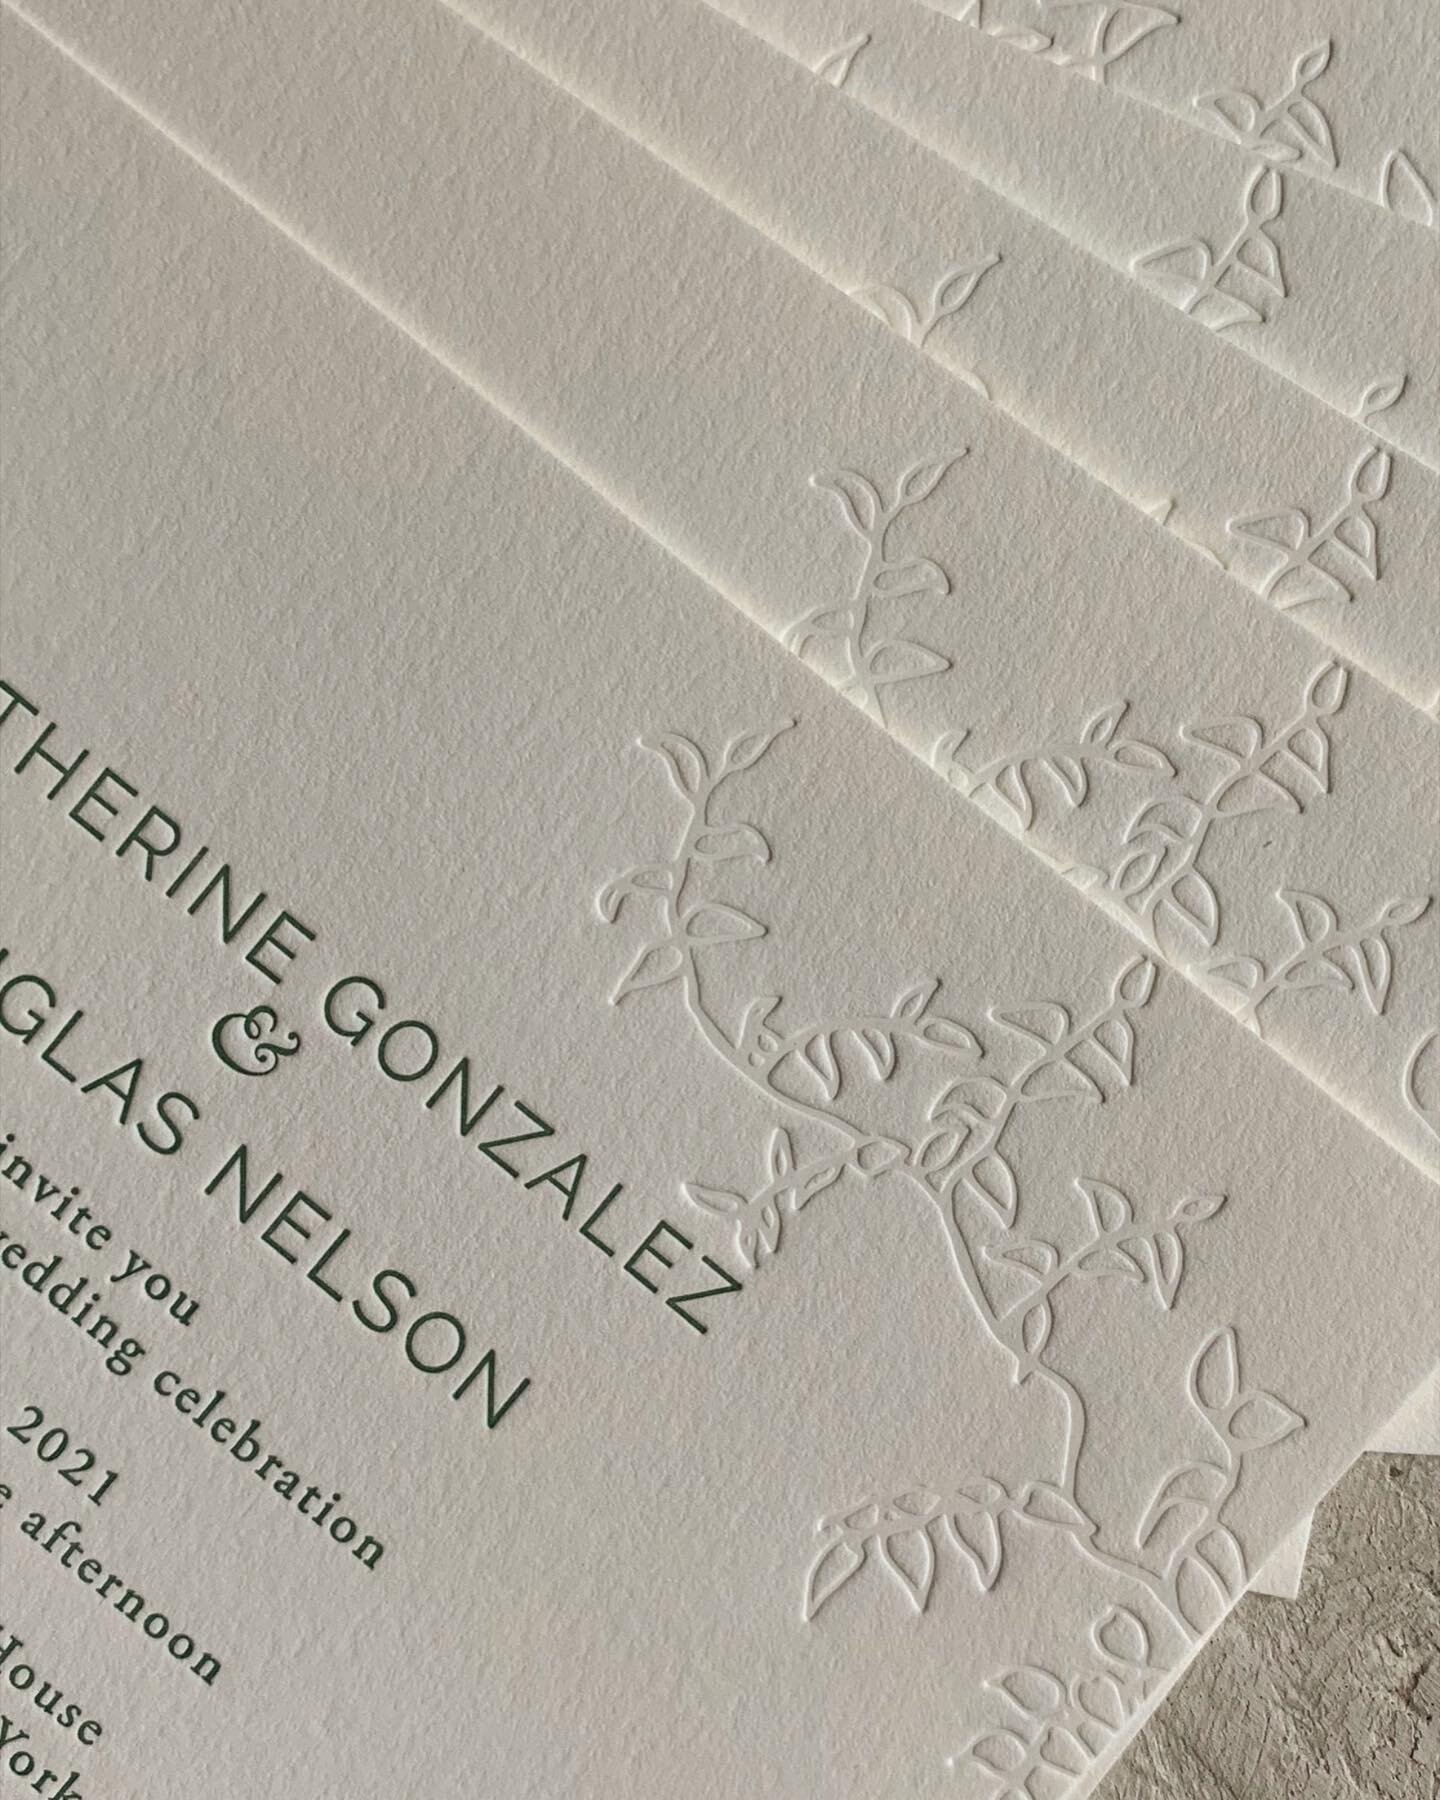 that blind impression combined with letterpress, does it get any better?!
#blindletterpress #deboss #debossing #weddinginspo #weddinginvites #weddinginvitationcard #letterpressinvitations #charlestonwedding #lowcountrywedding